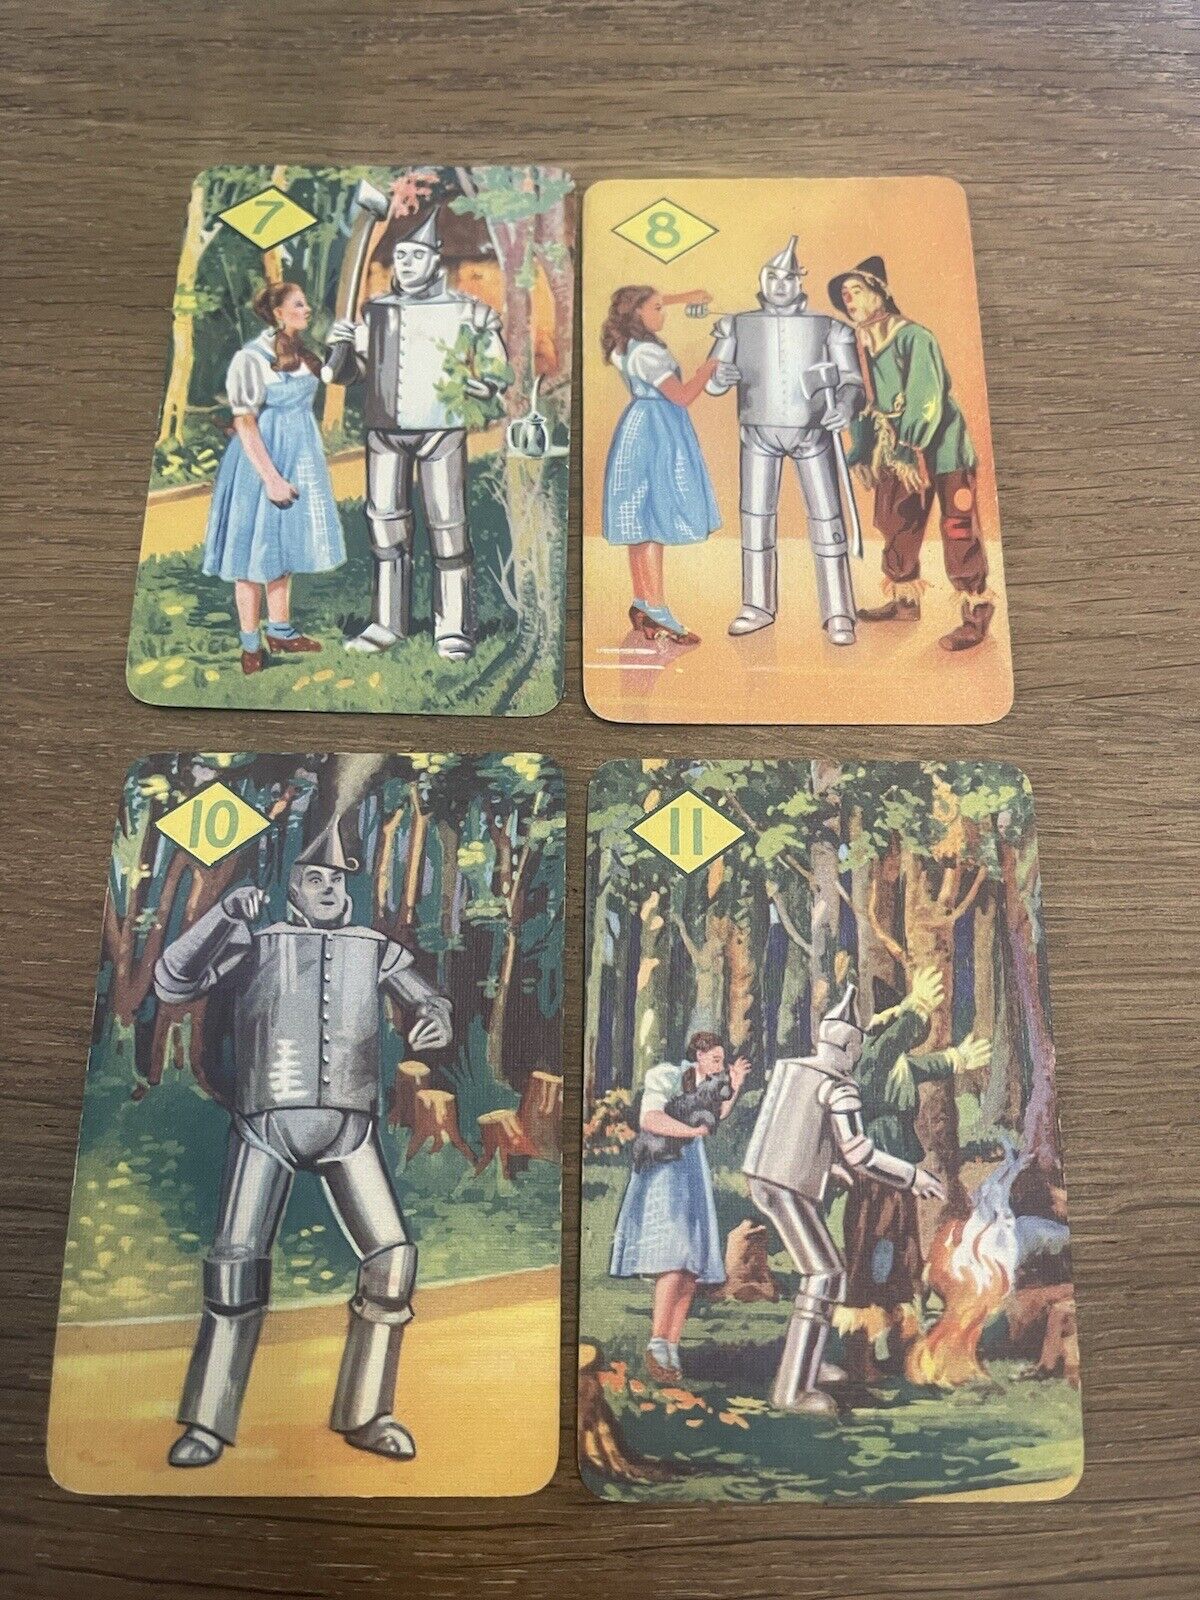 Wizard of Oz 1940 Card Game by Pepys Extremely Rare Vintage Cards Nearly Antique